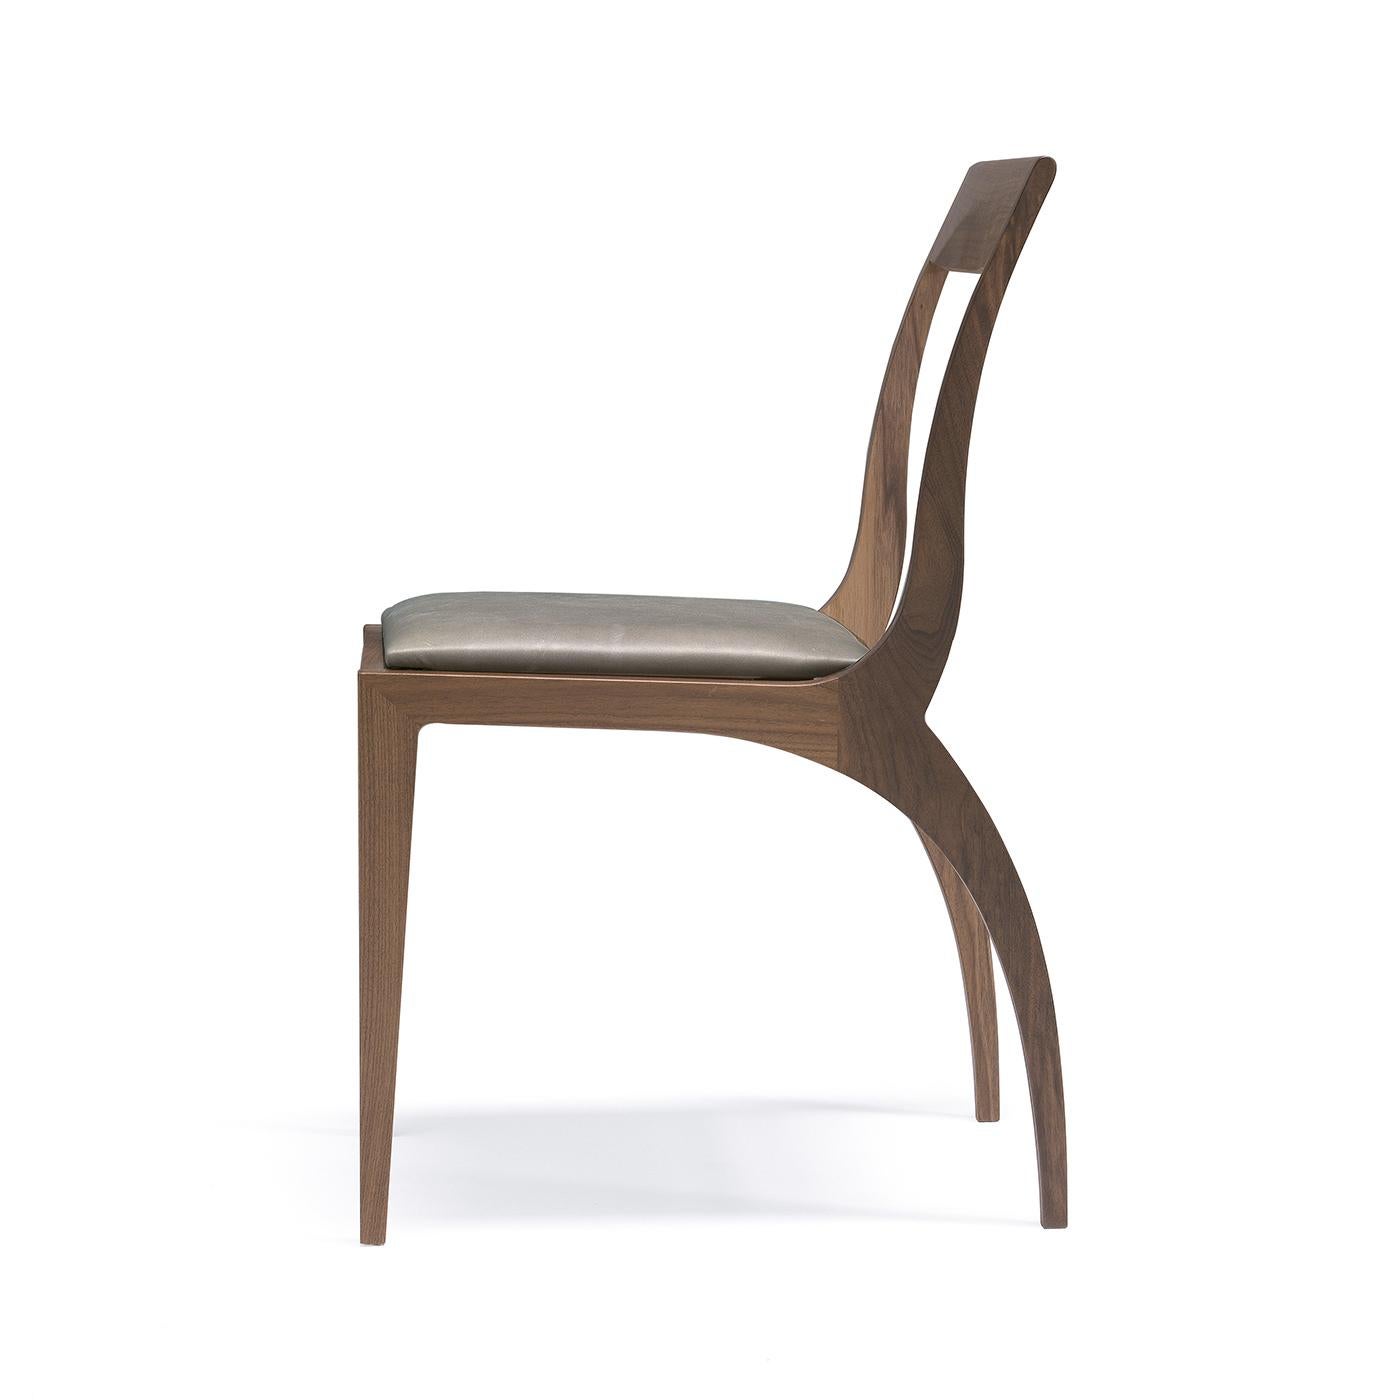 Designed by architect Fabio Rebosio, this chair is a sophisticated accent piece that combines functionality and a highly decorative quality. Its structure in solid Canaletto walnut boasts curved back legs that find a delicate counterpart in the open